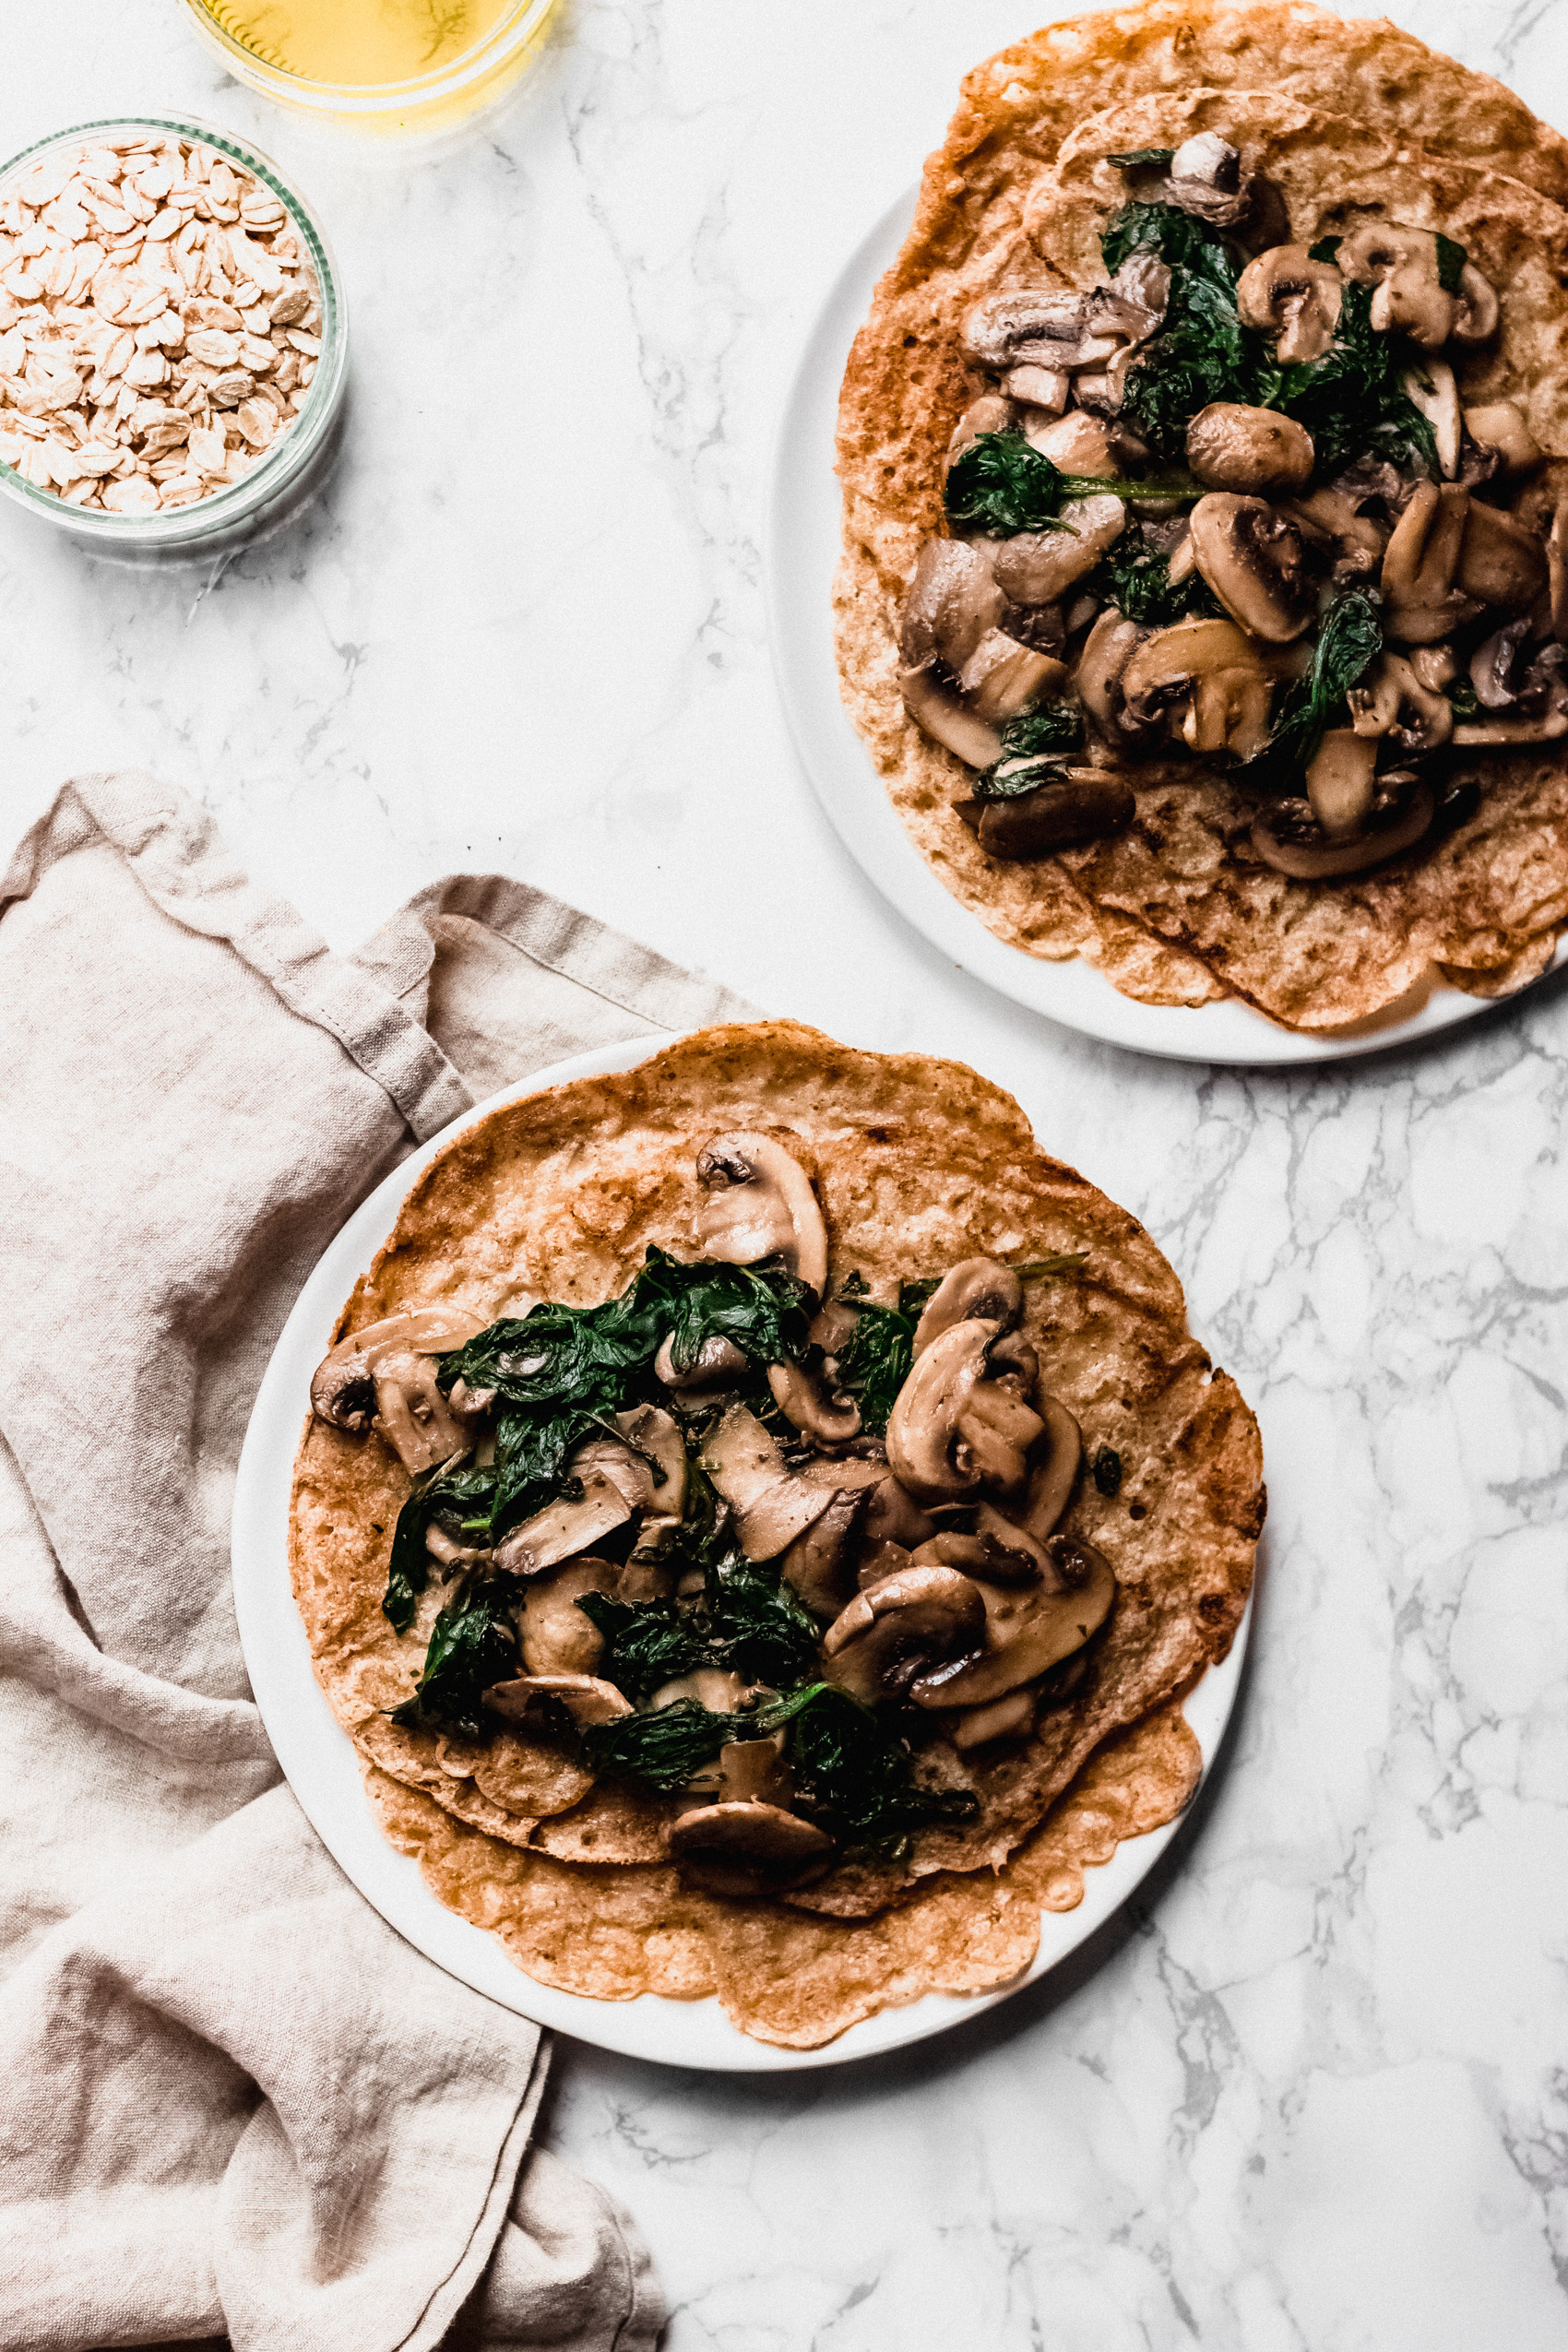 two plates each with a crepe filled with mushrooms and sauteed greens